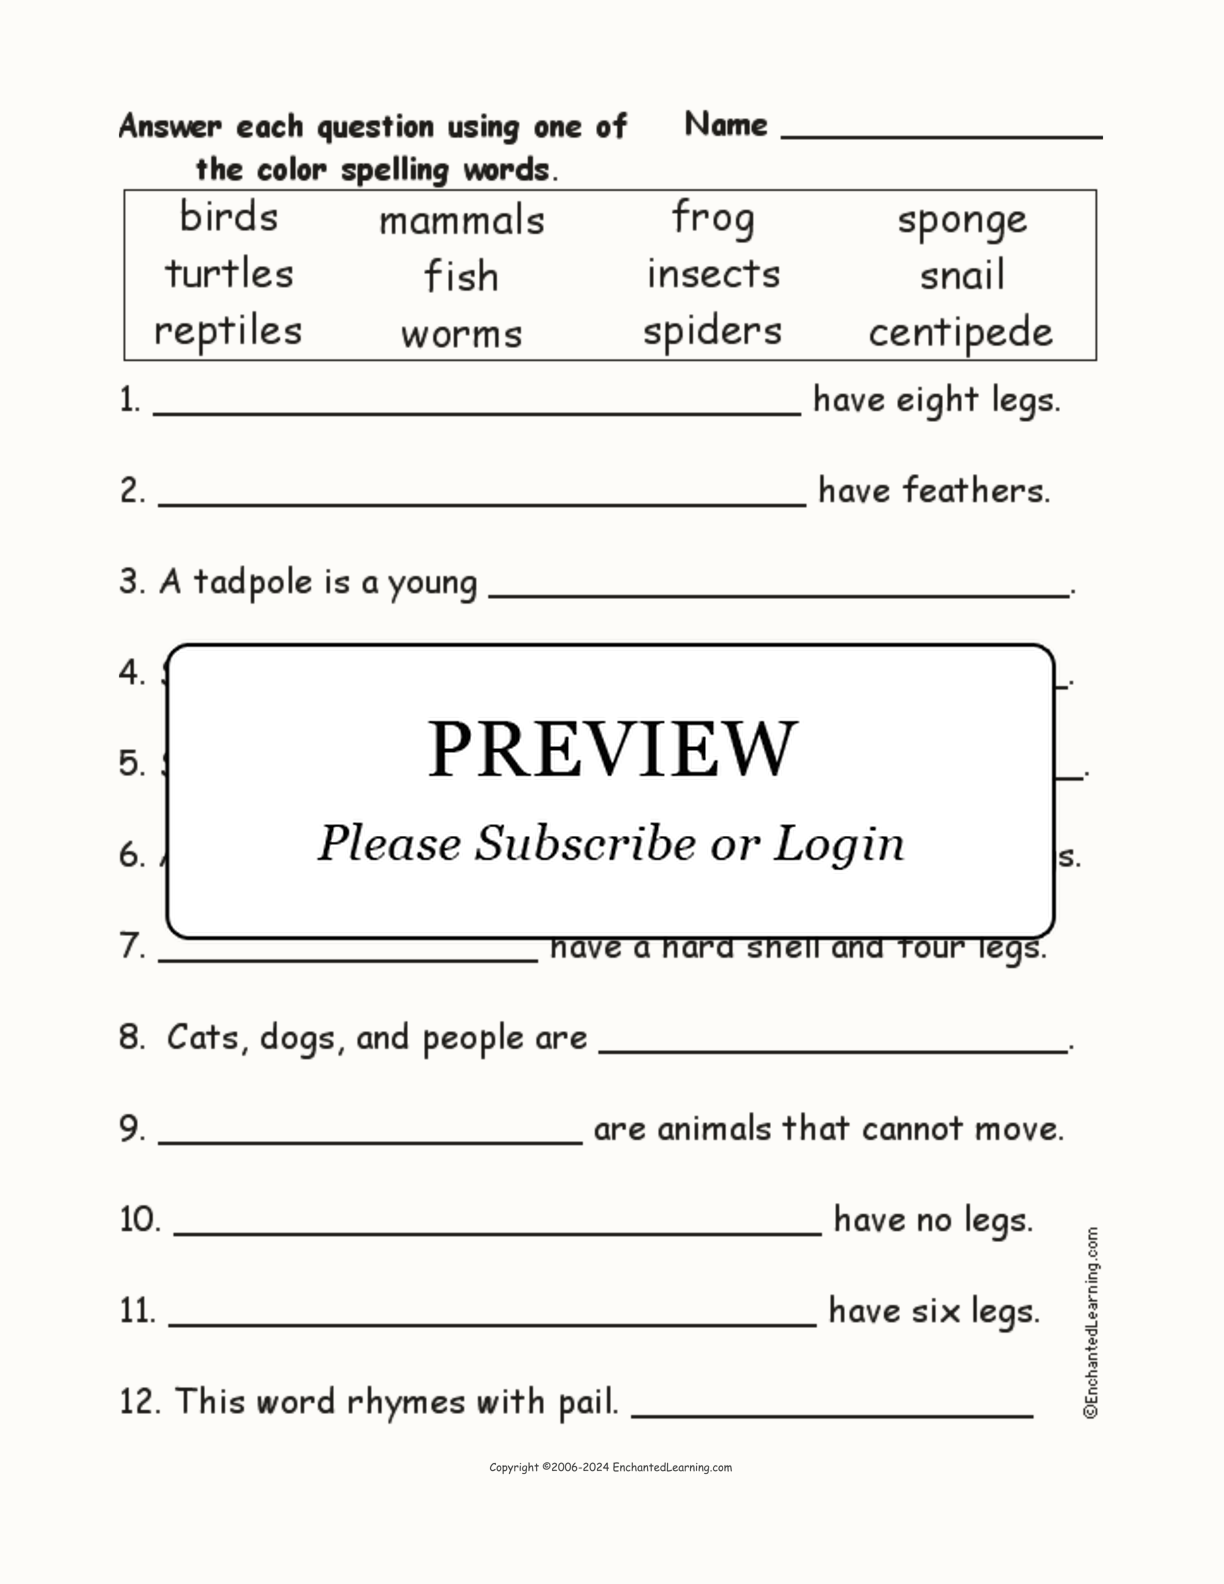 Animal Spelling Word Questions interactive worksheet page 1